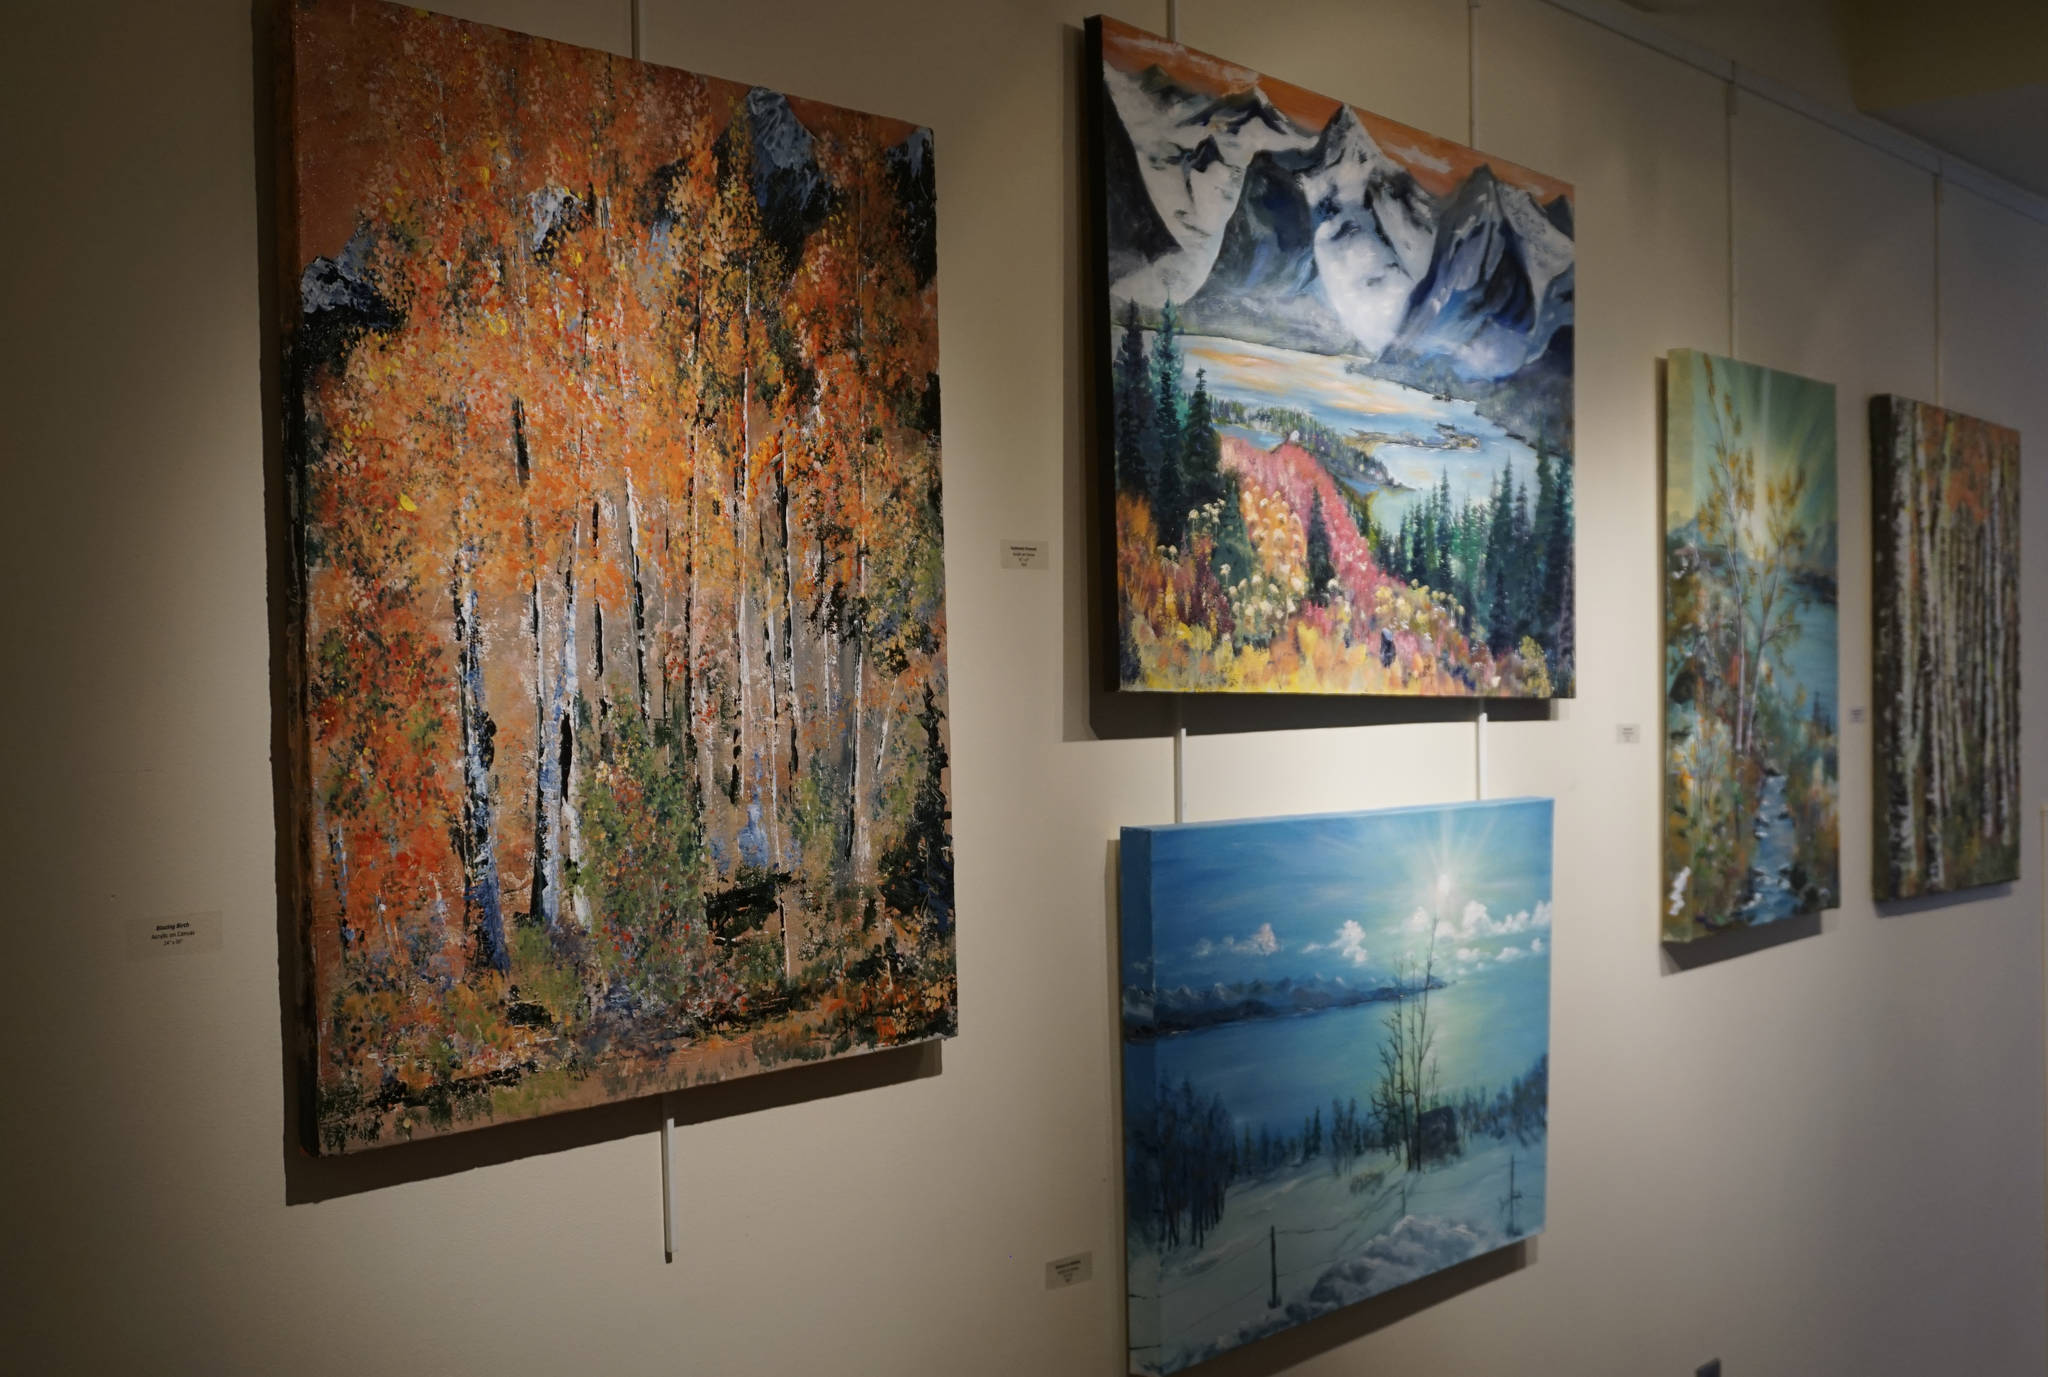 Some of John Fenske’s paintings at the First Friday, April 5, 2019, opening for his retrospective showing at Kachemak Bay Campus in Homer, Alaska. (Photo by Michael Armstrong/Homer News)